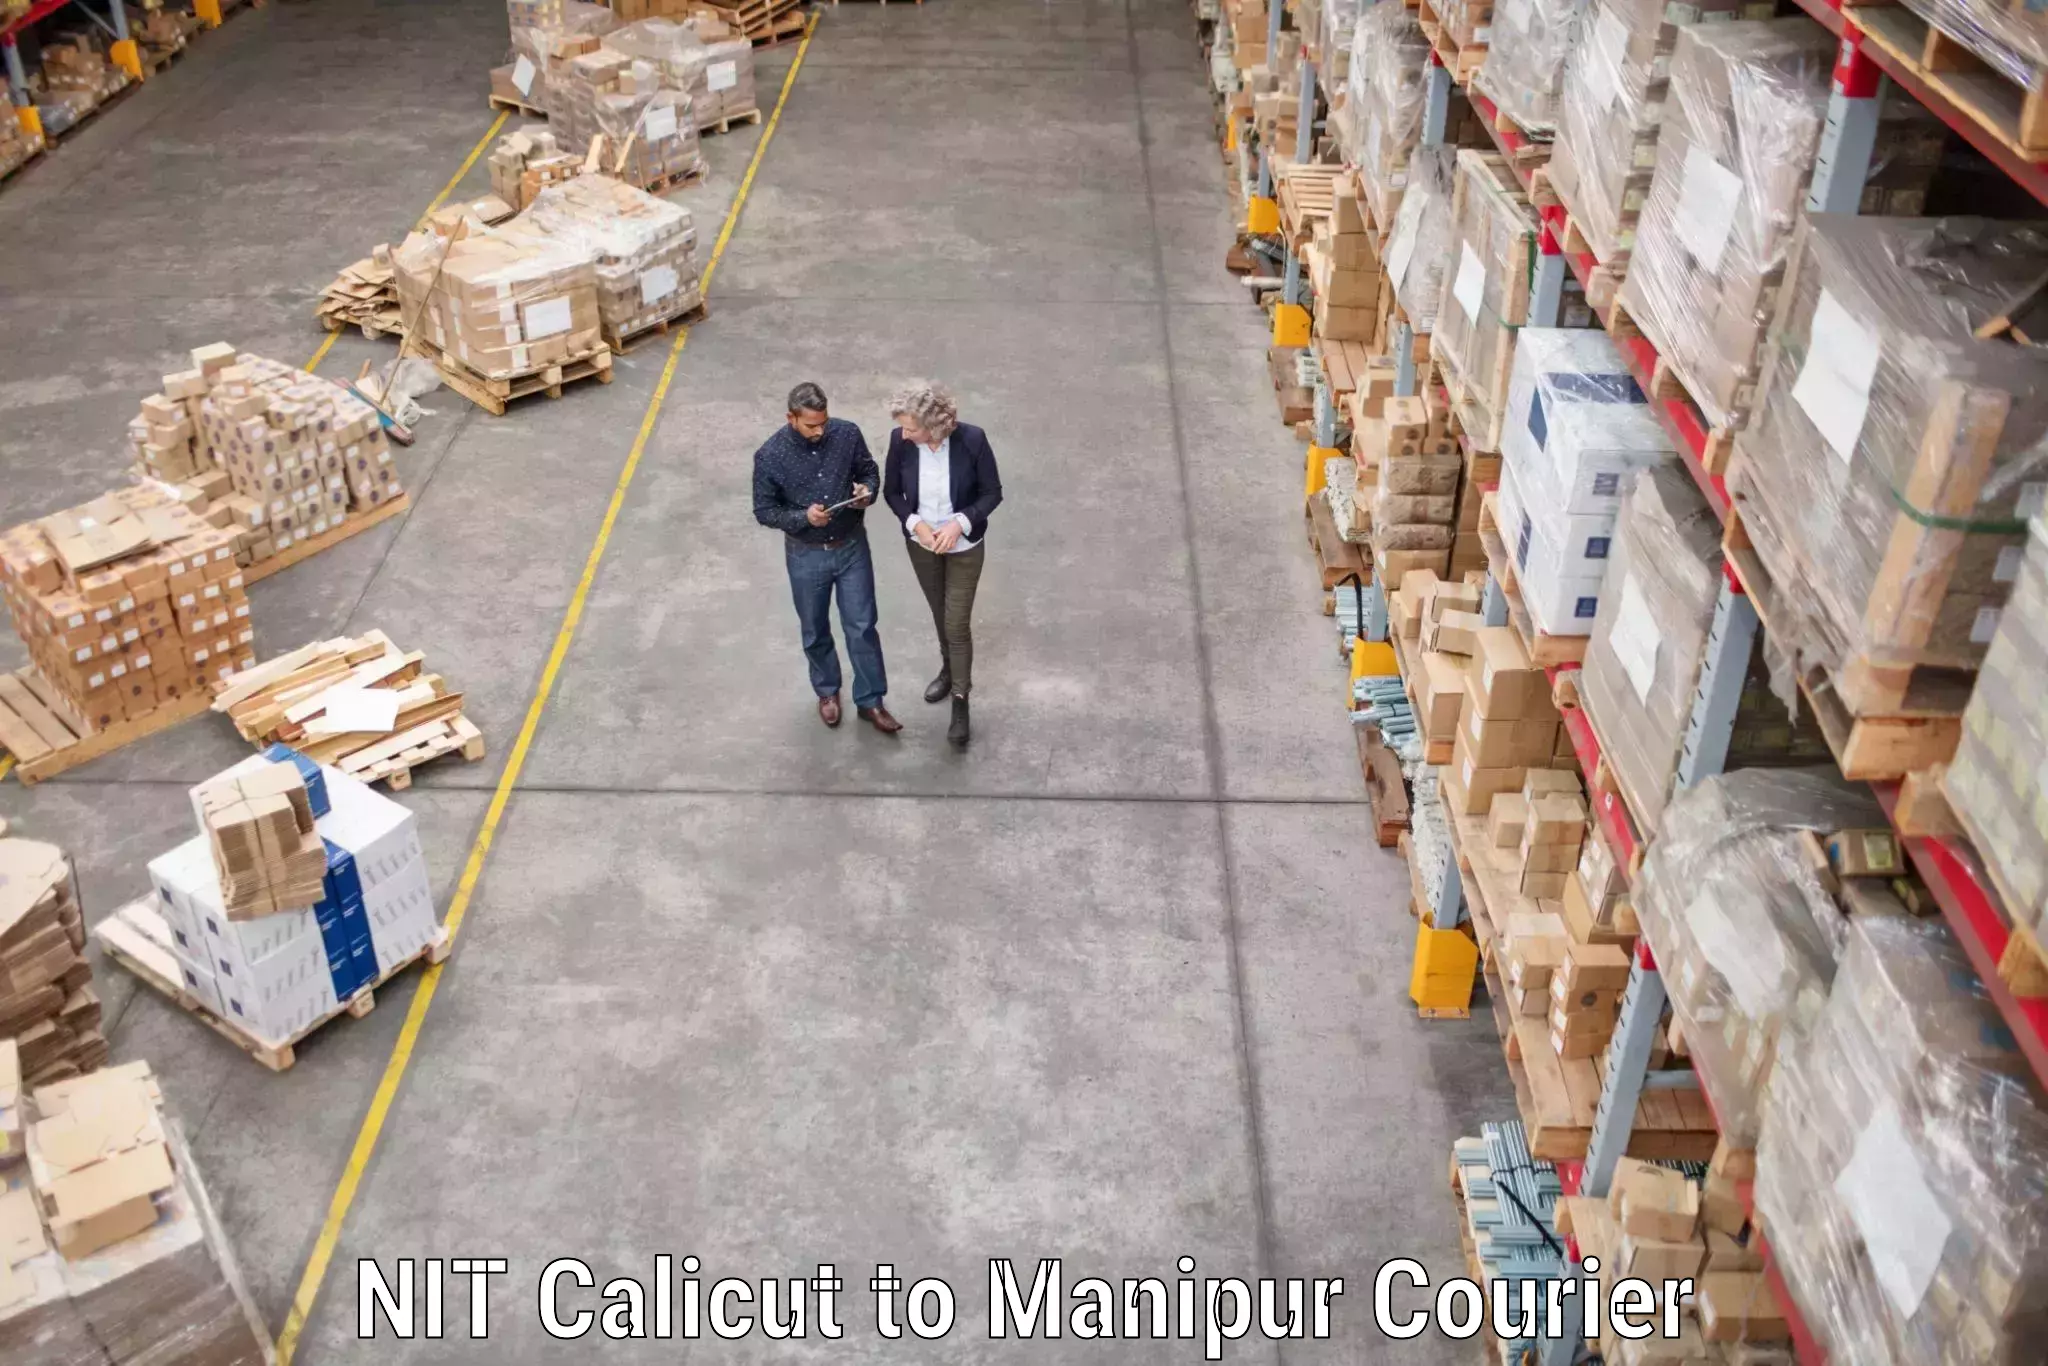 Trusted relocation experts NIT Calicut to Manipur